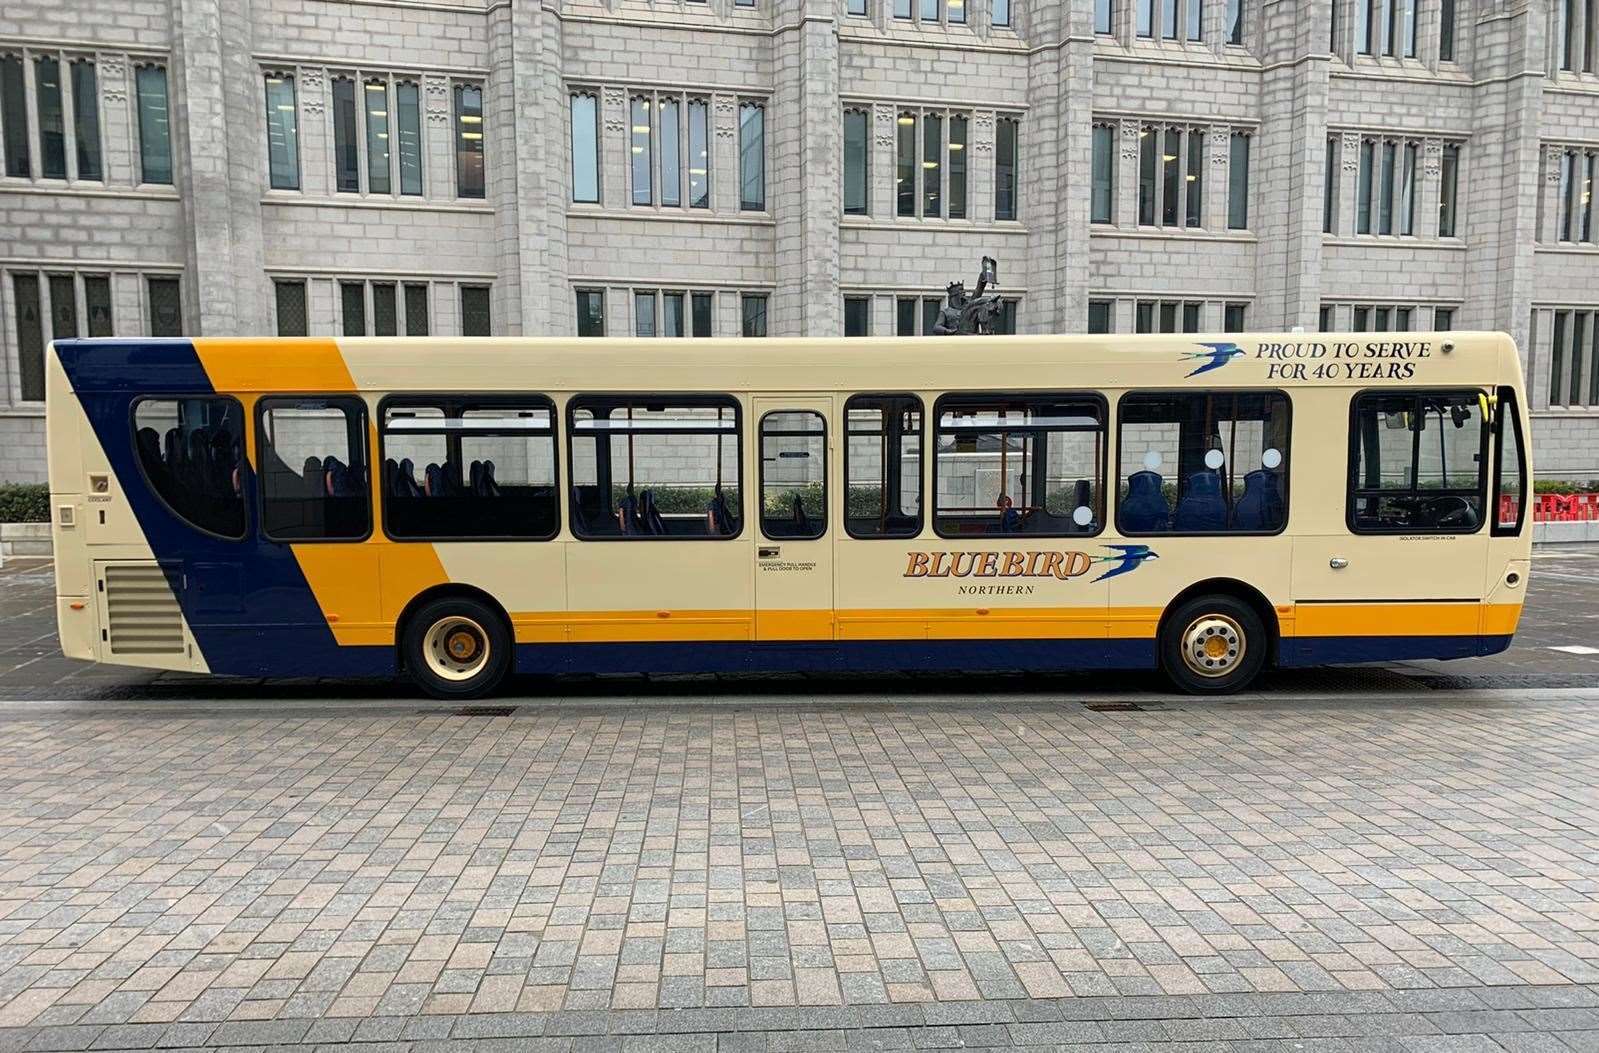 The Heritage bus recreates the look of a mid-80s Northern Scottish vehicle